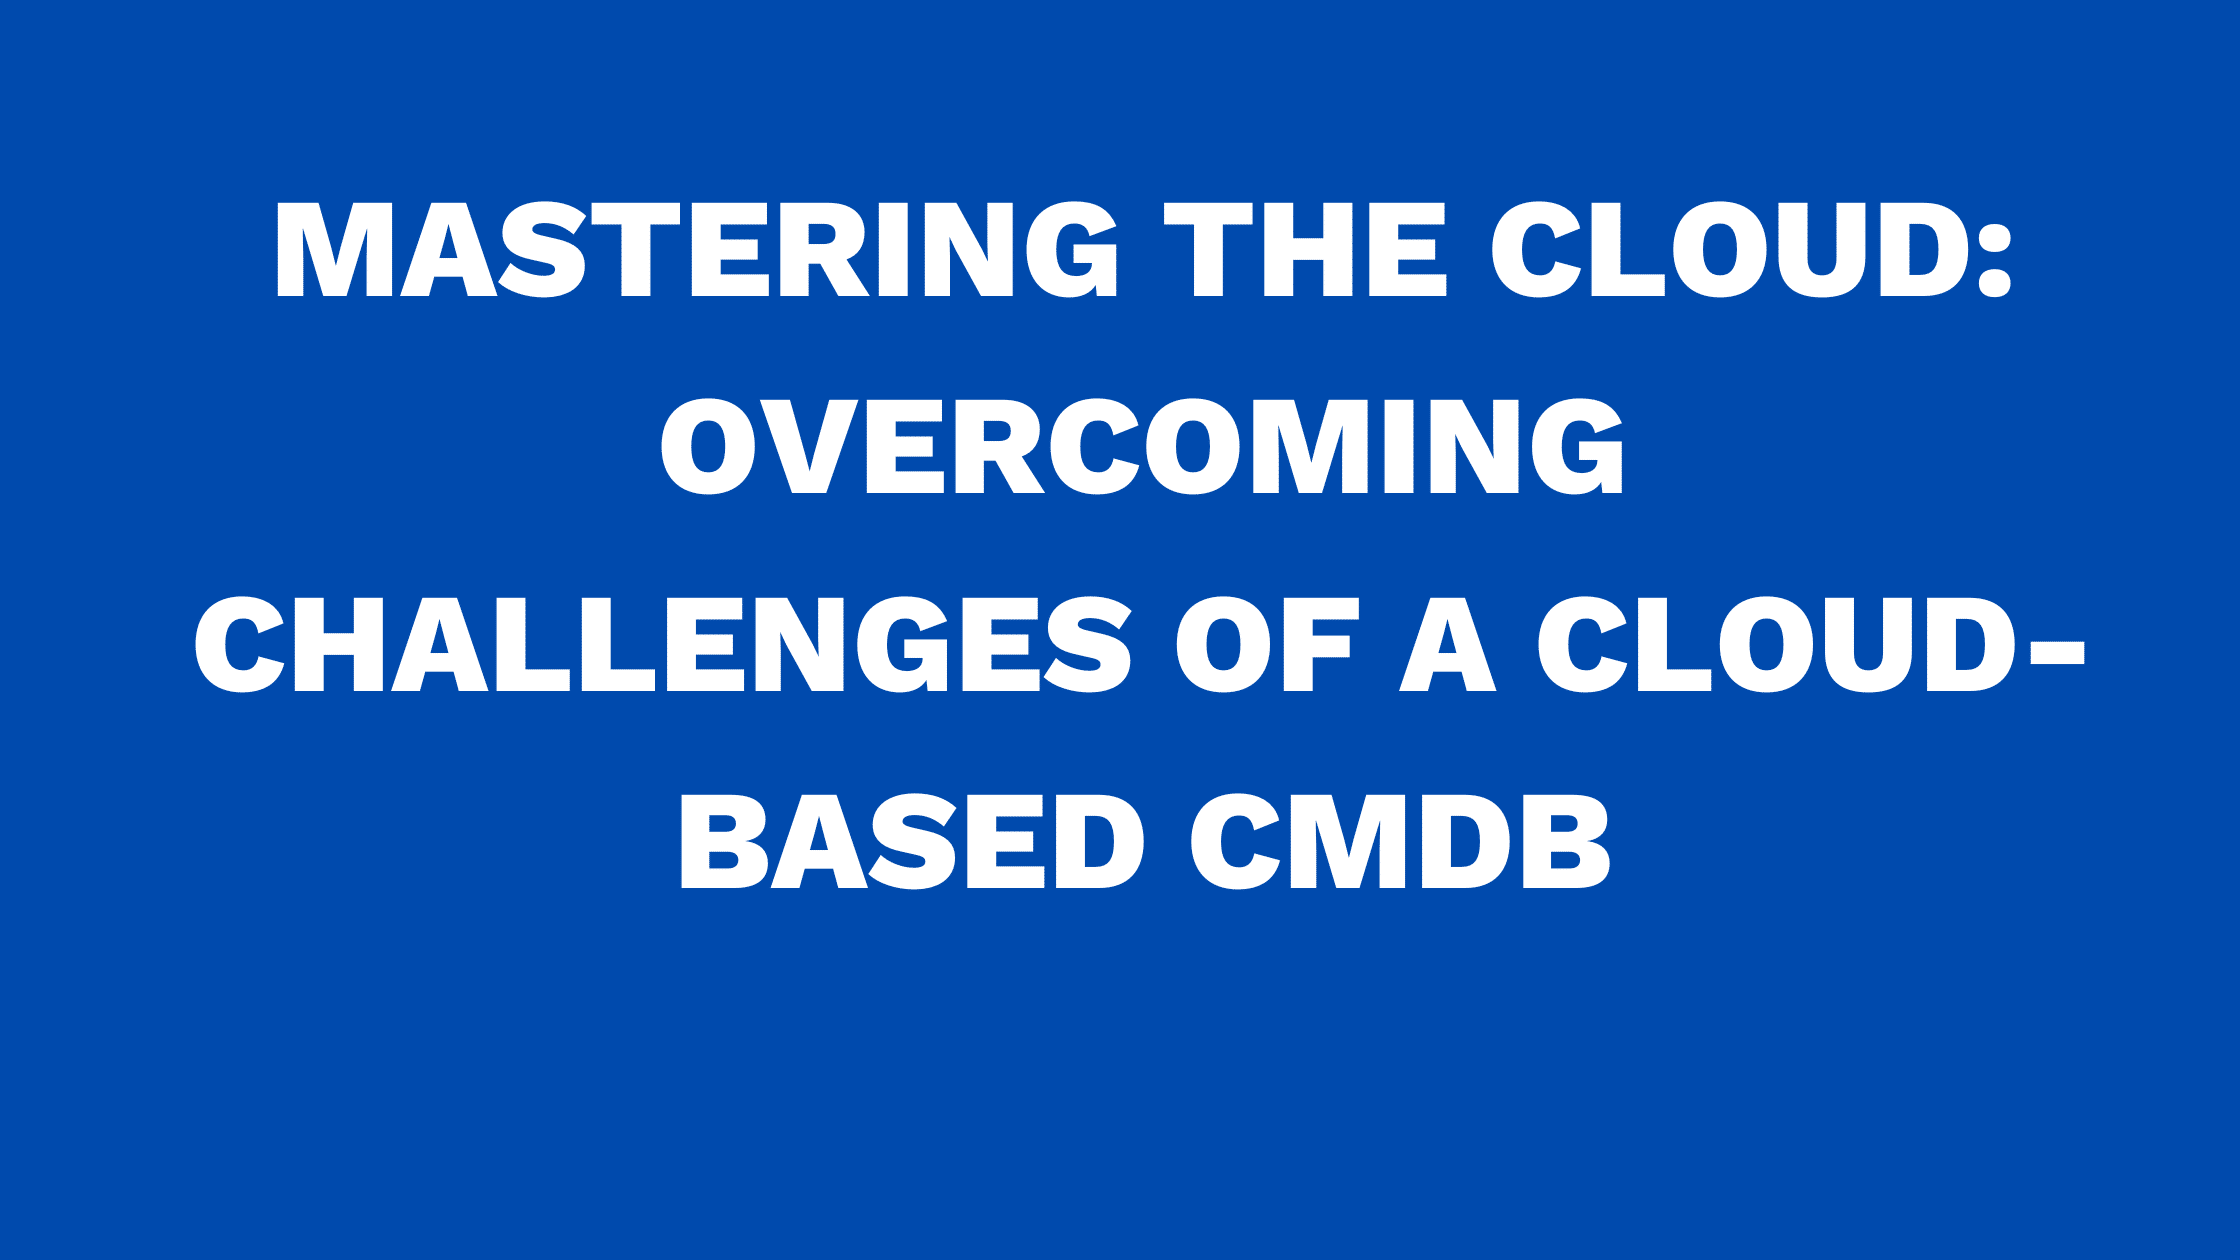 Mastering the Cloud: Overcoming Challenges of a Cloud-Based CMDB